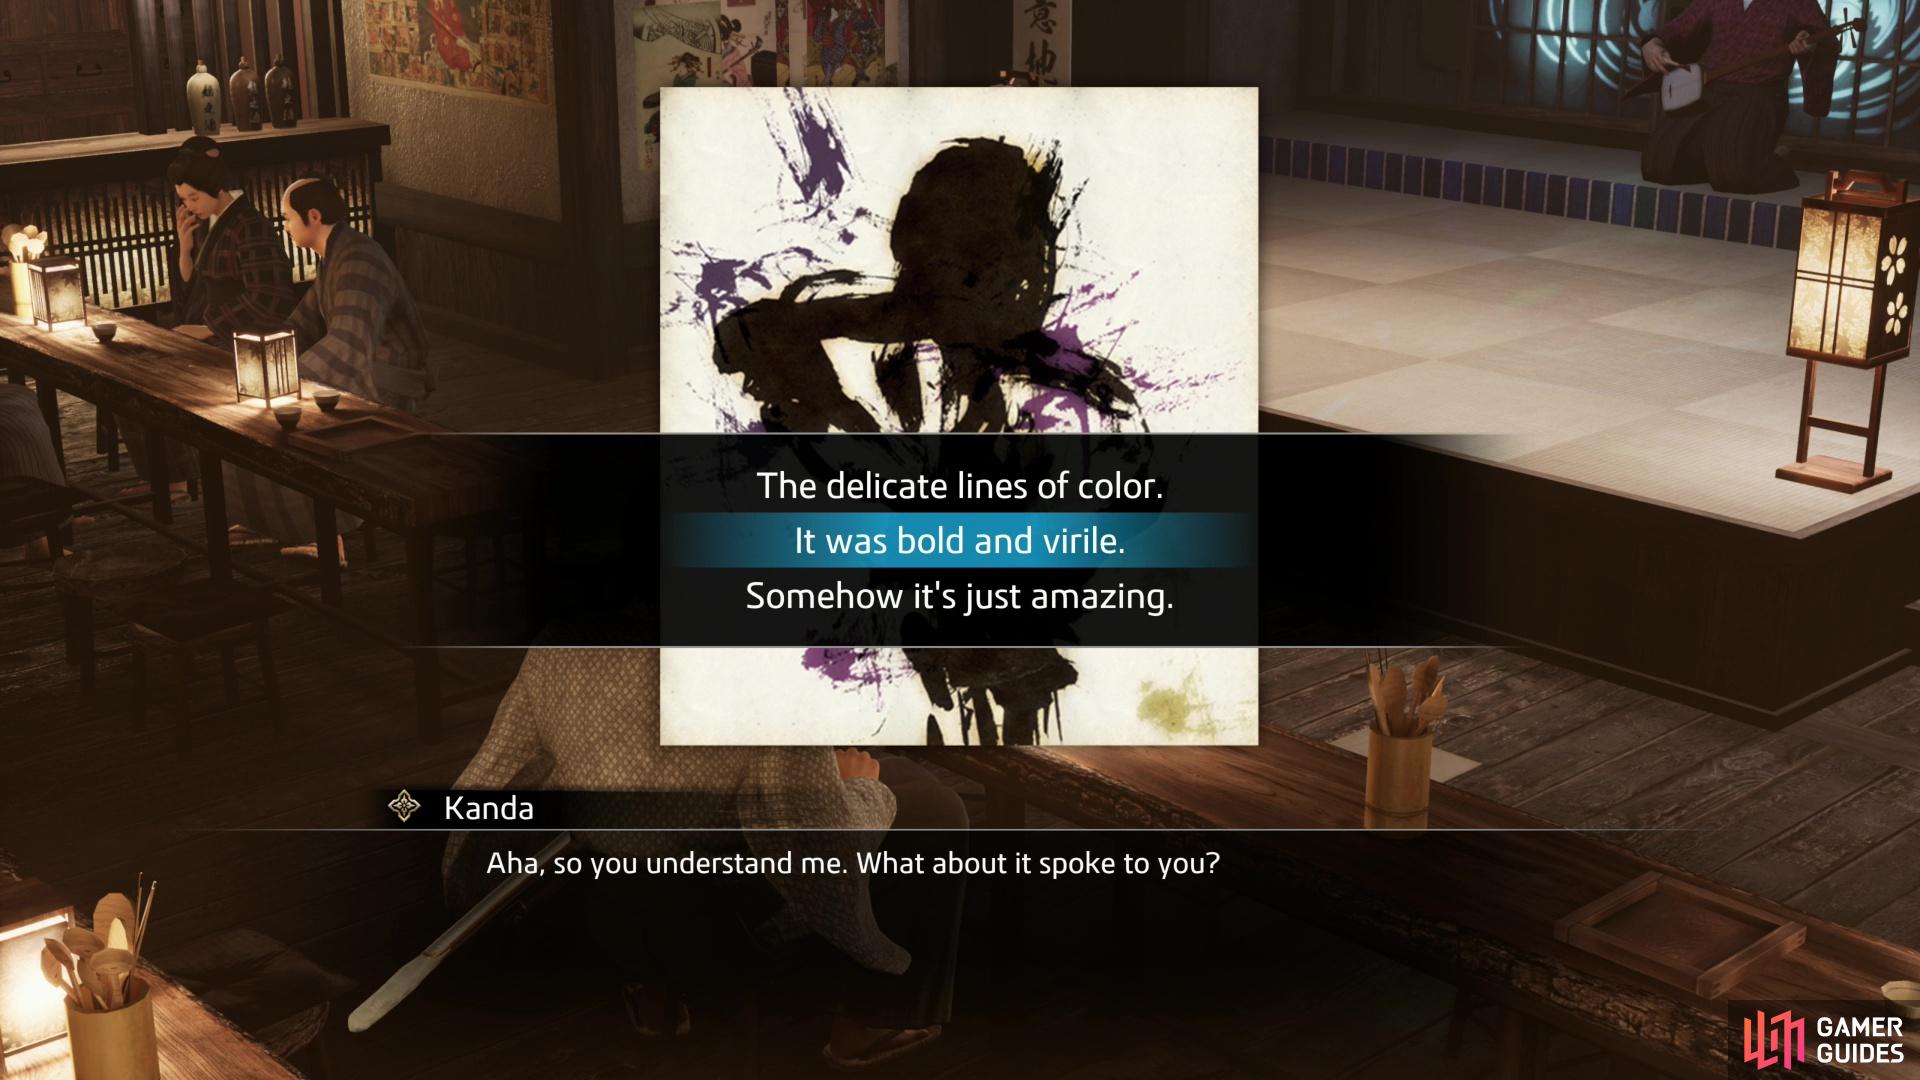 then tell Kanda the painting your singing inspires is "bold".